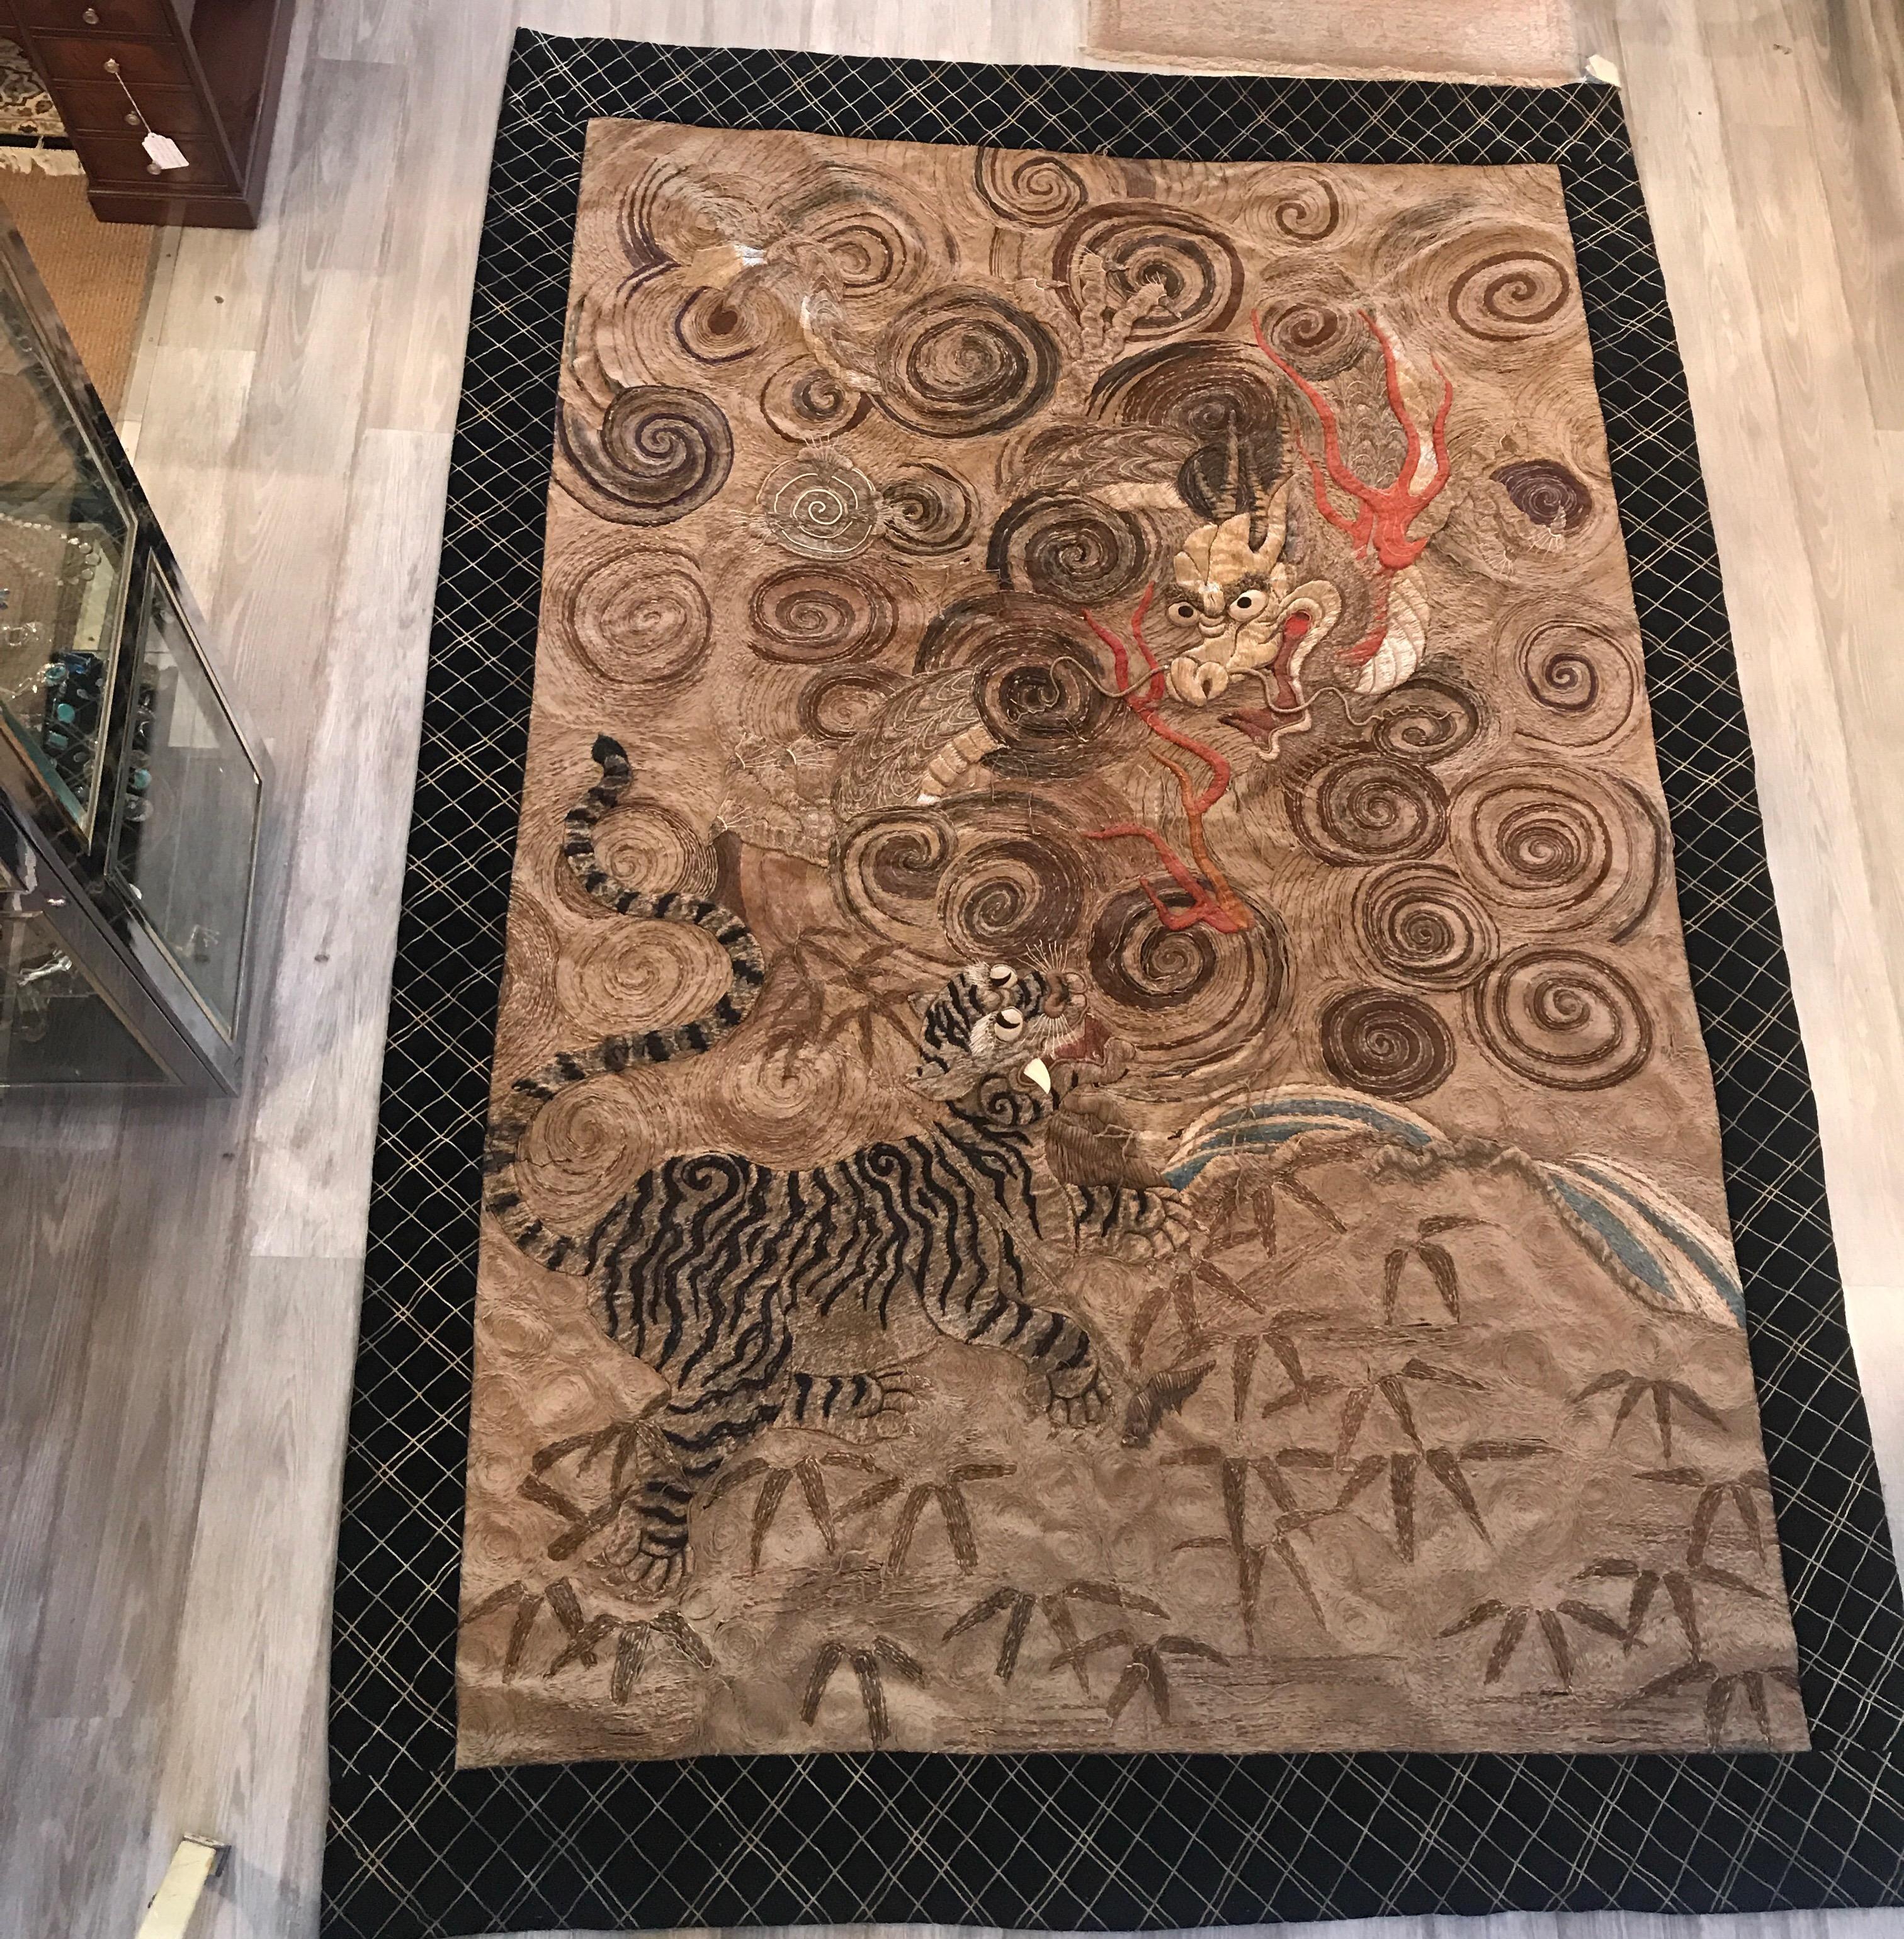 An impressive handmade Japanese needlework tapestry with velvet border. The intricate tapestry with dragon and tiger with the background totally filled with hand stitched and embroidered pattern. The edge with a later velvet border, Meiji Period,